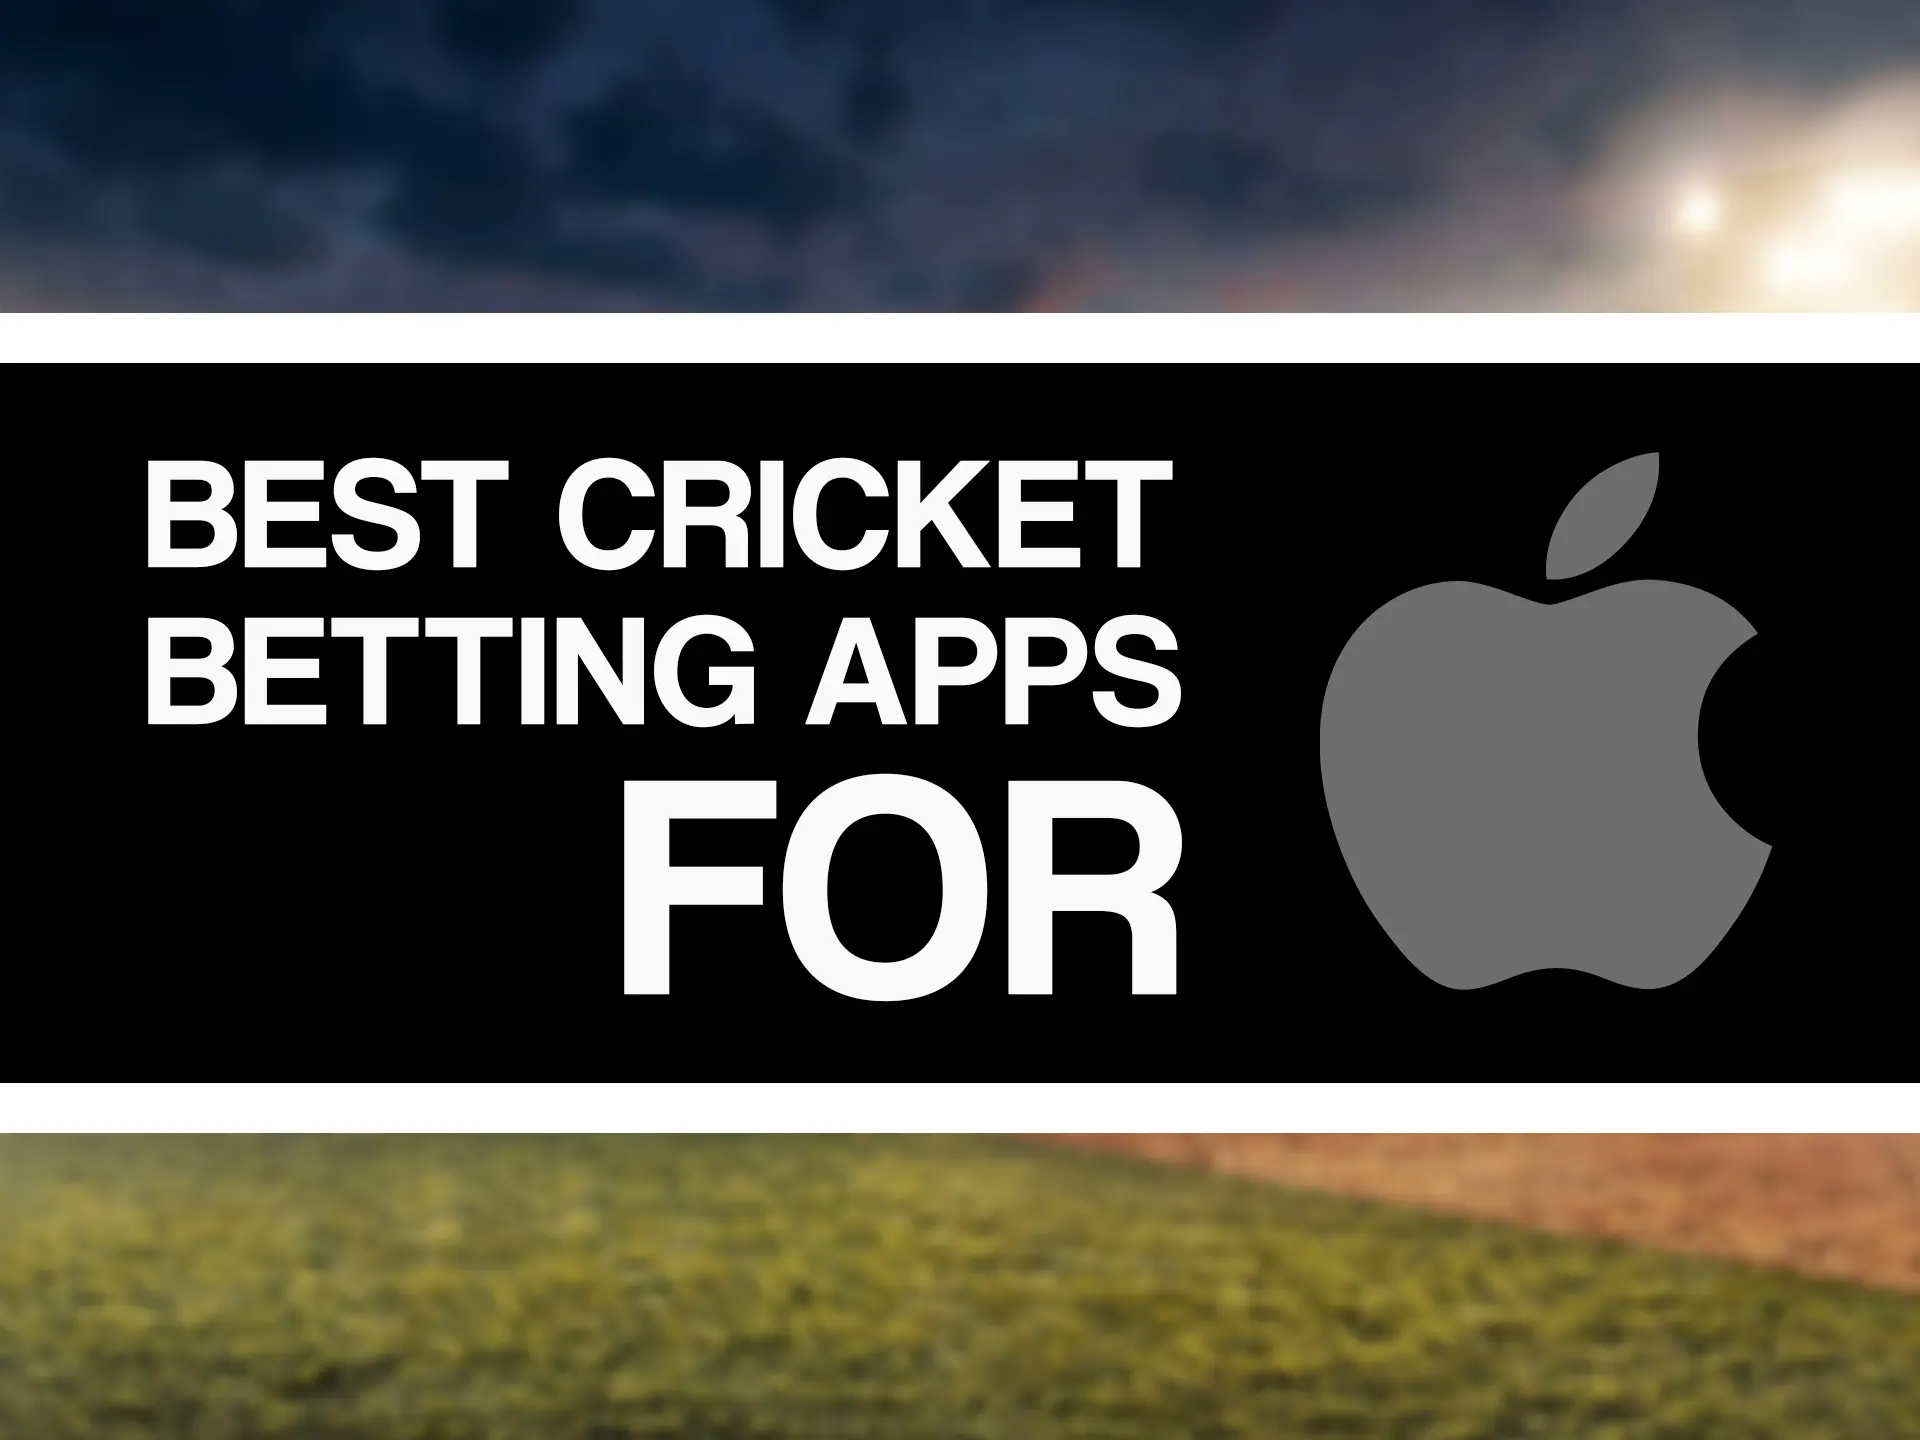 Install circket betting app on your iOS device.